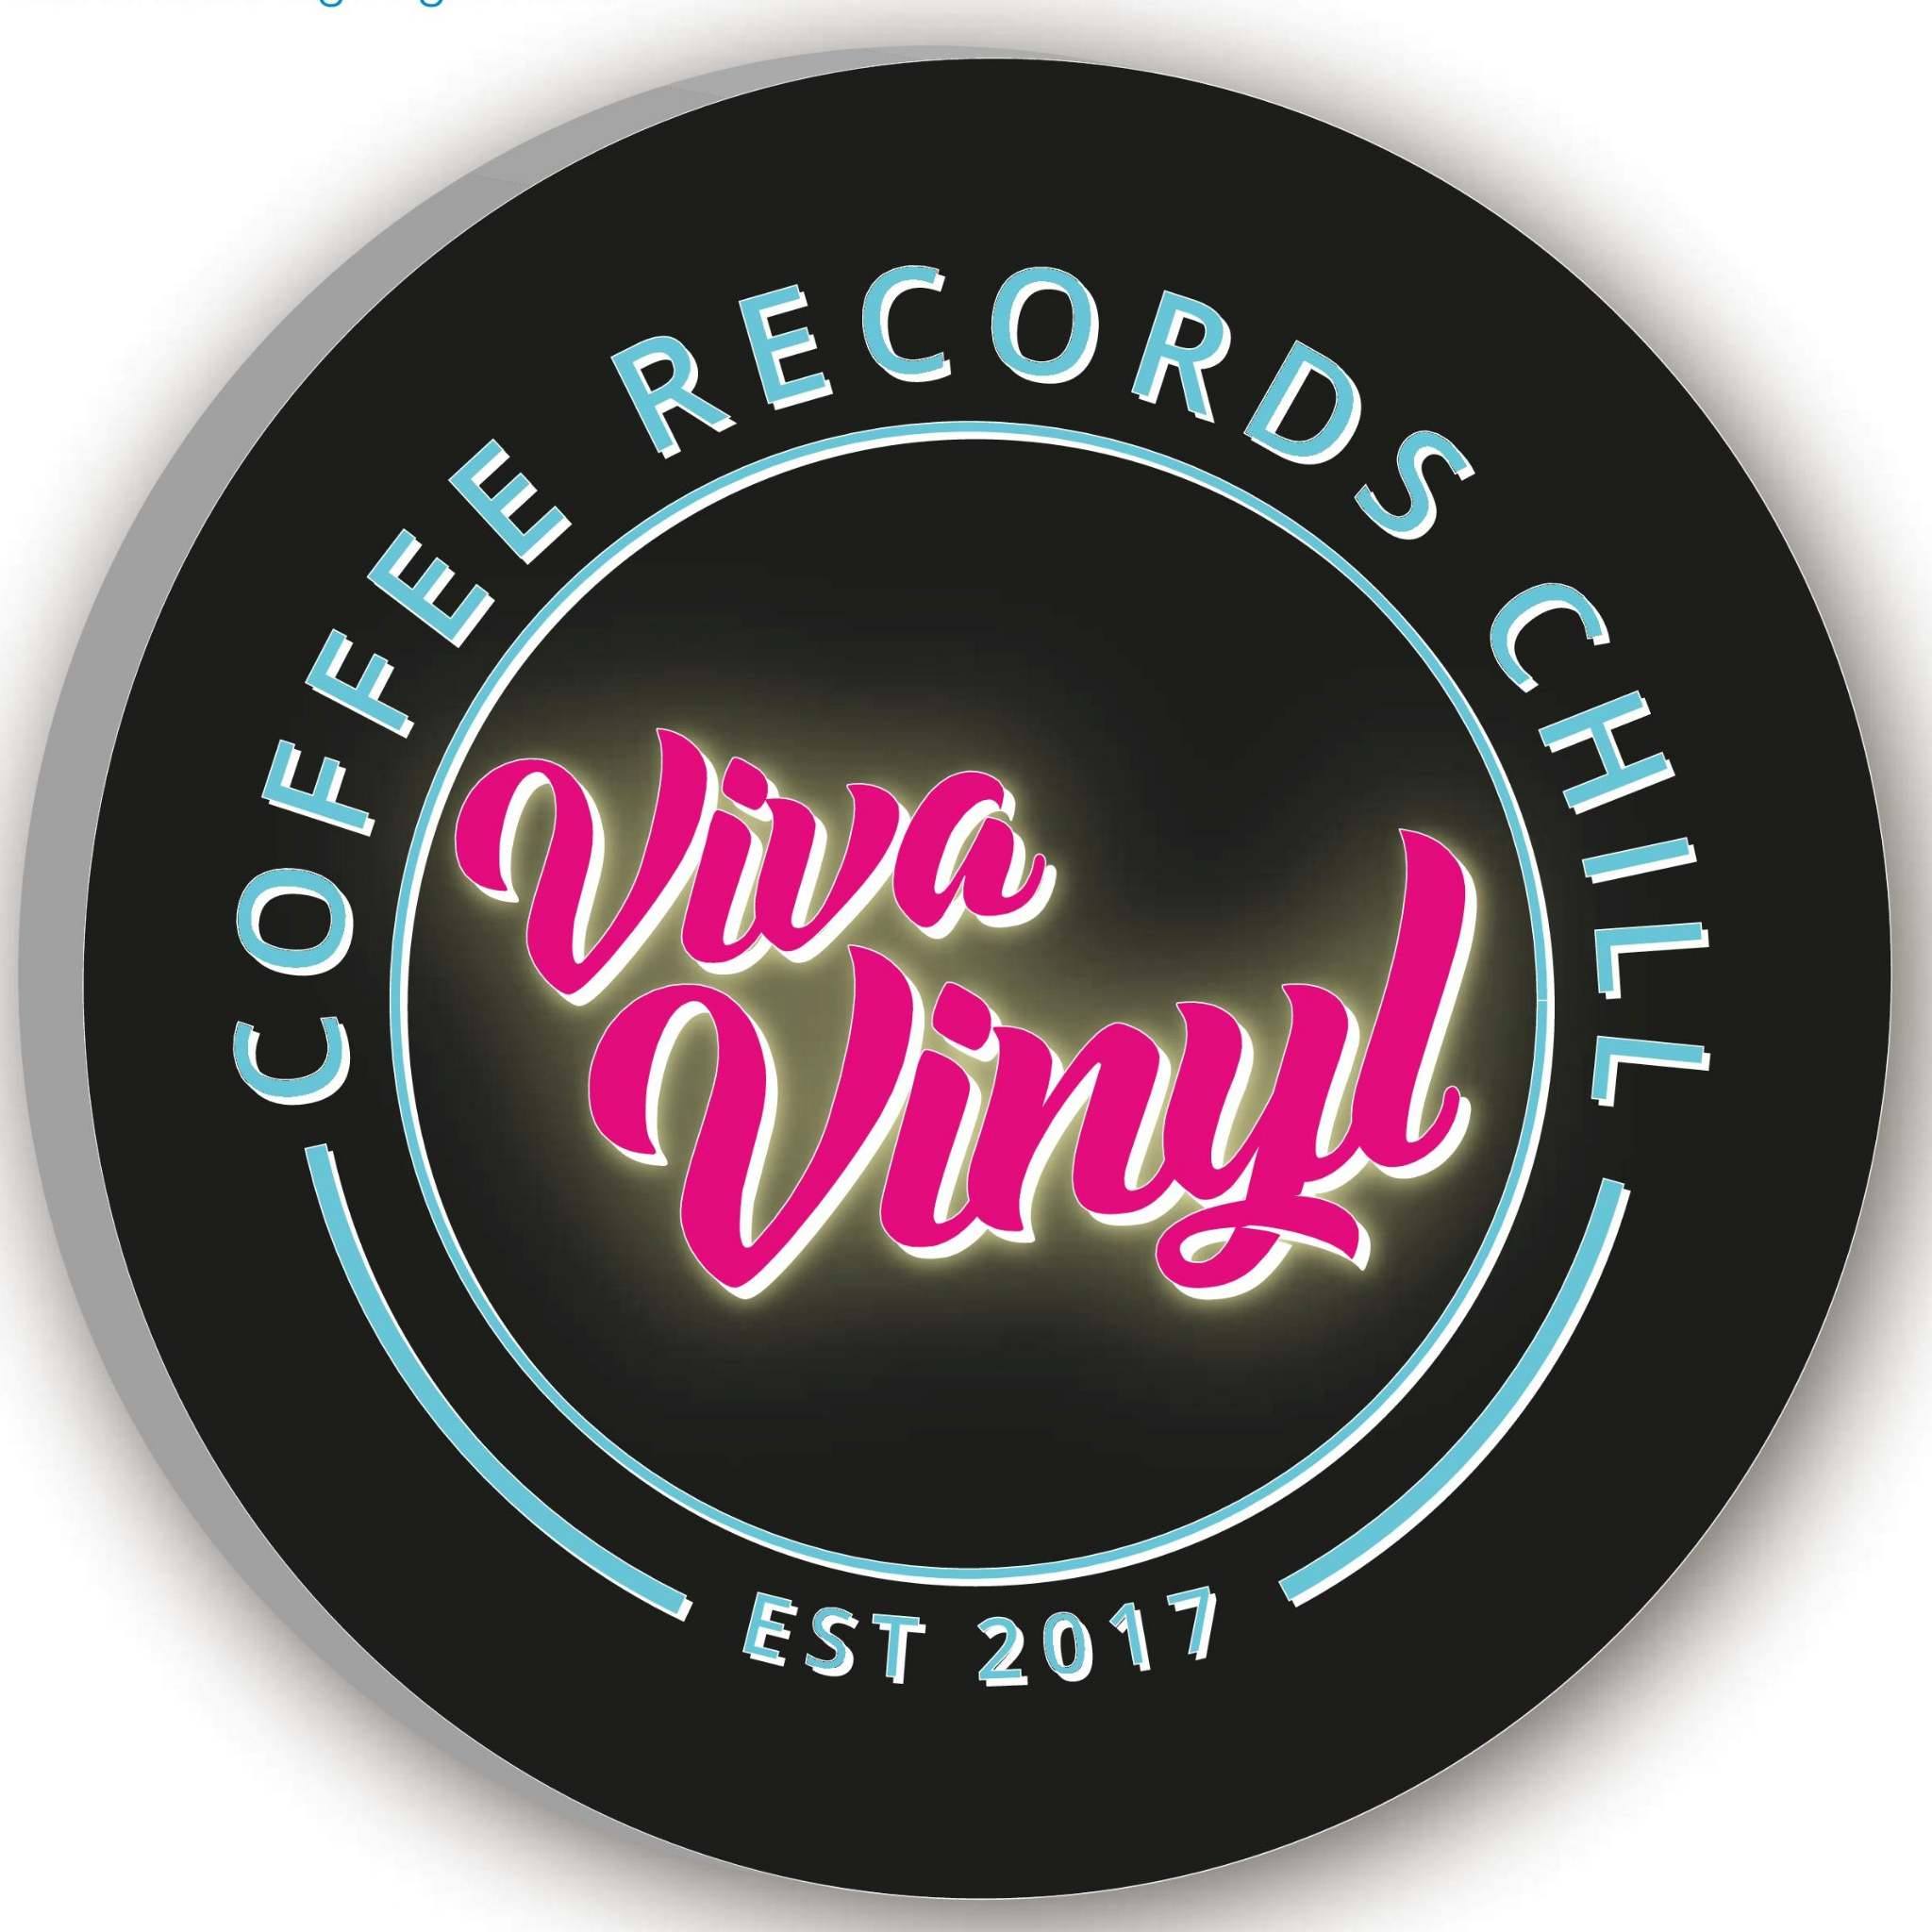 Collection from the Viva-Vinyl Record Store & Cafe - Brighton 